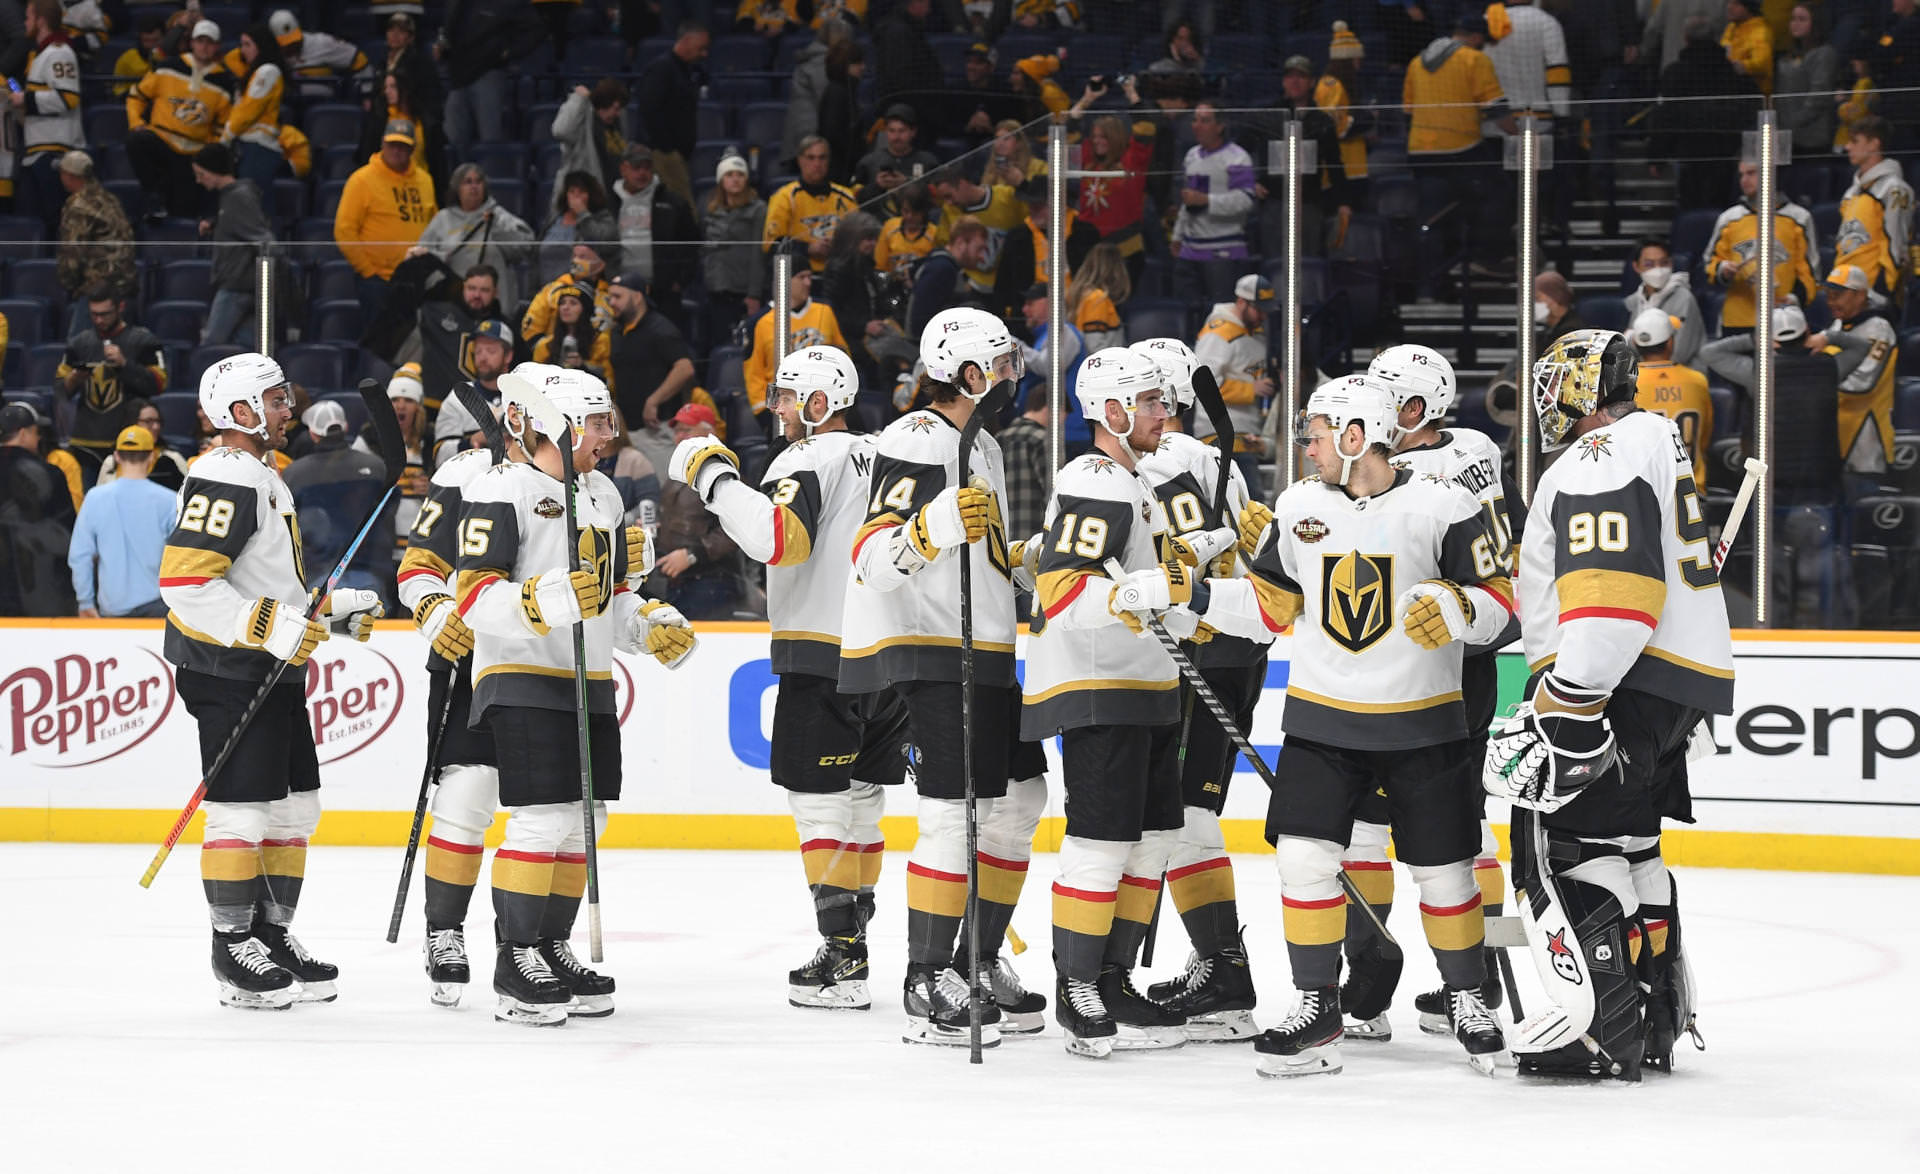 Vegas Golden Knights players celebrate after a win against the Nashville Predators